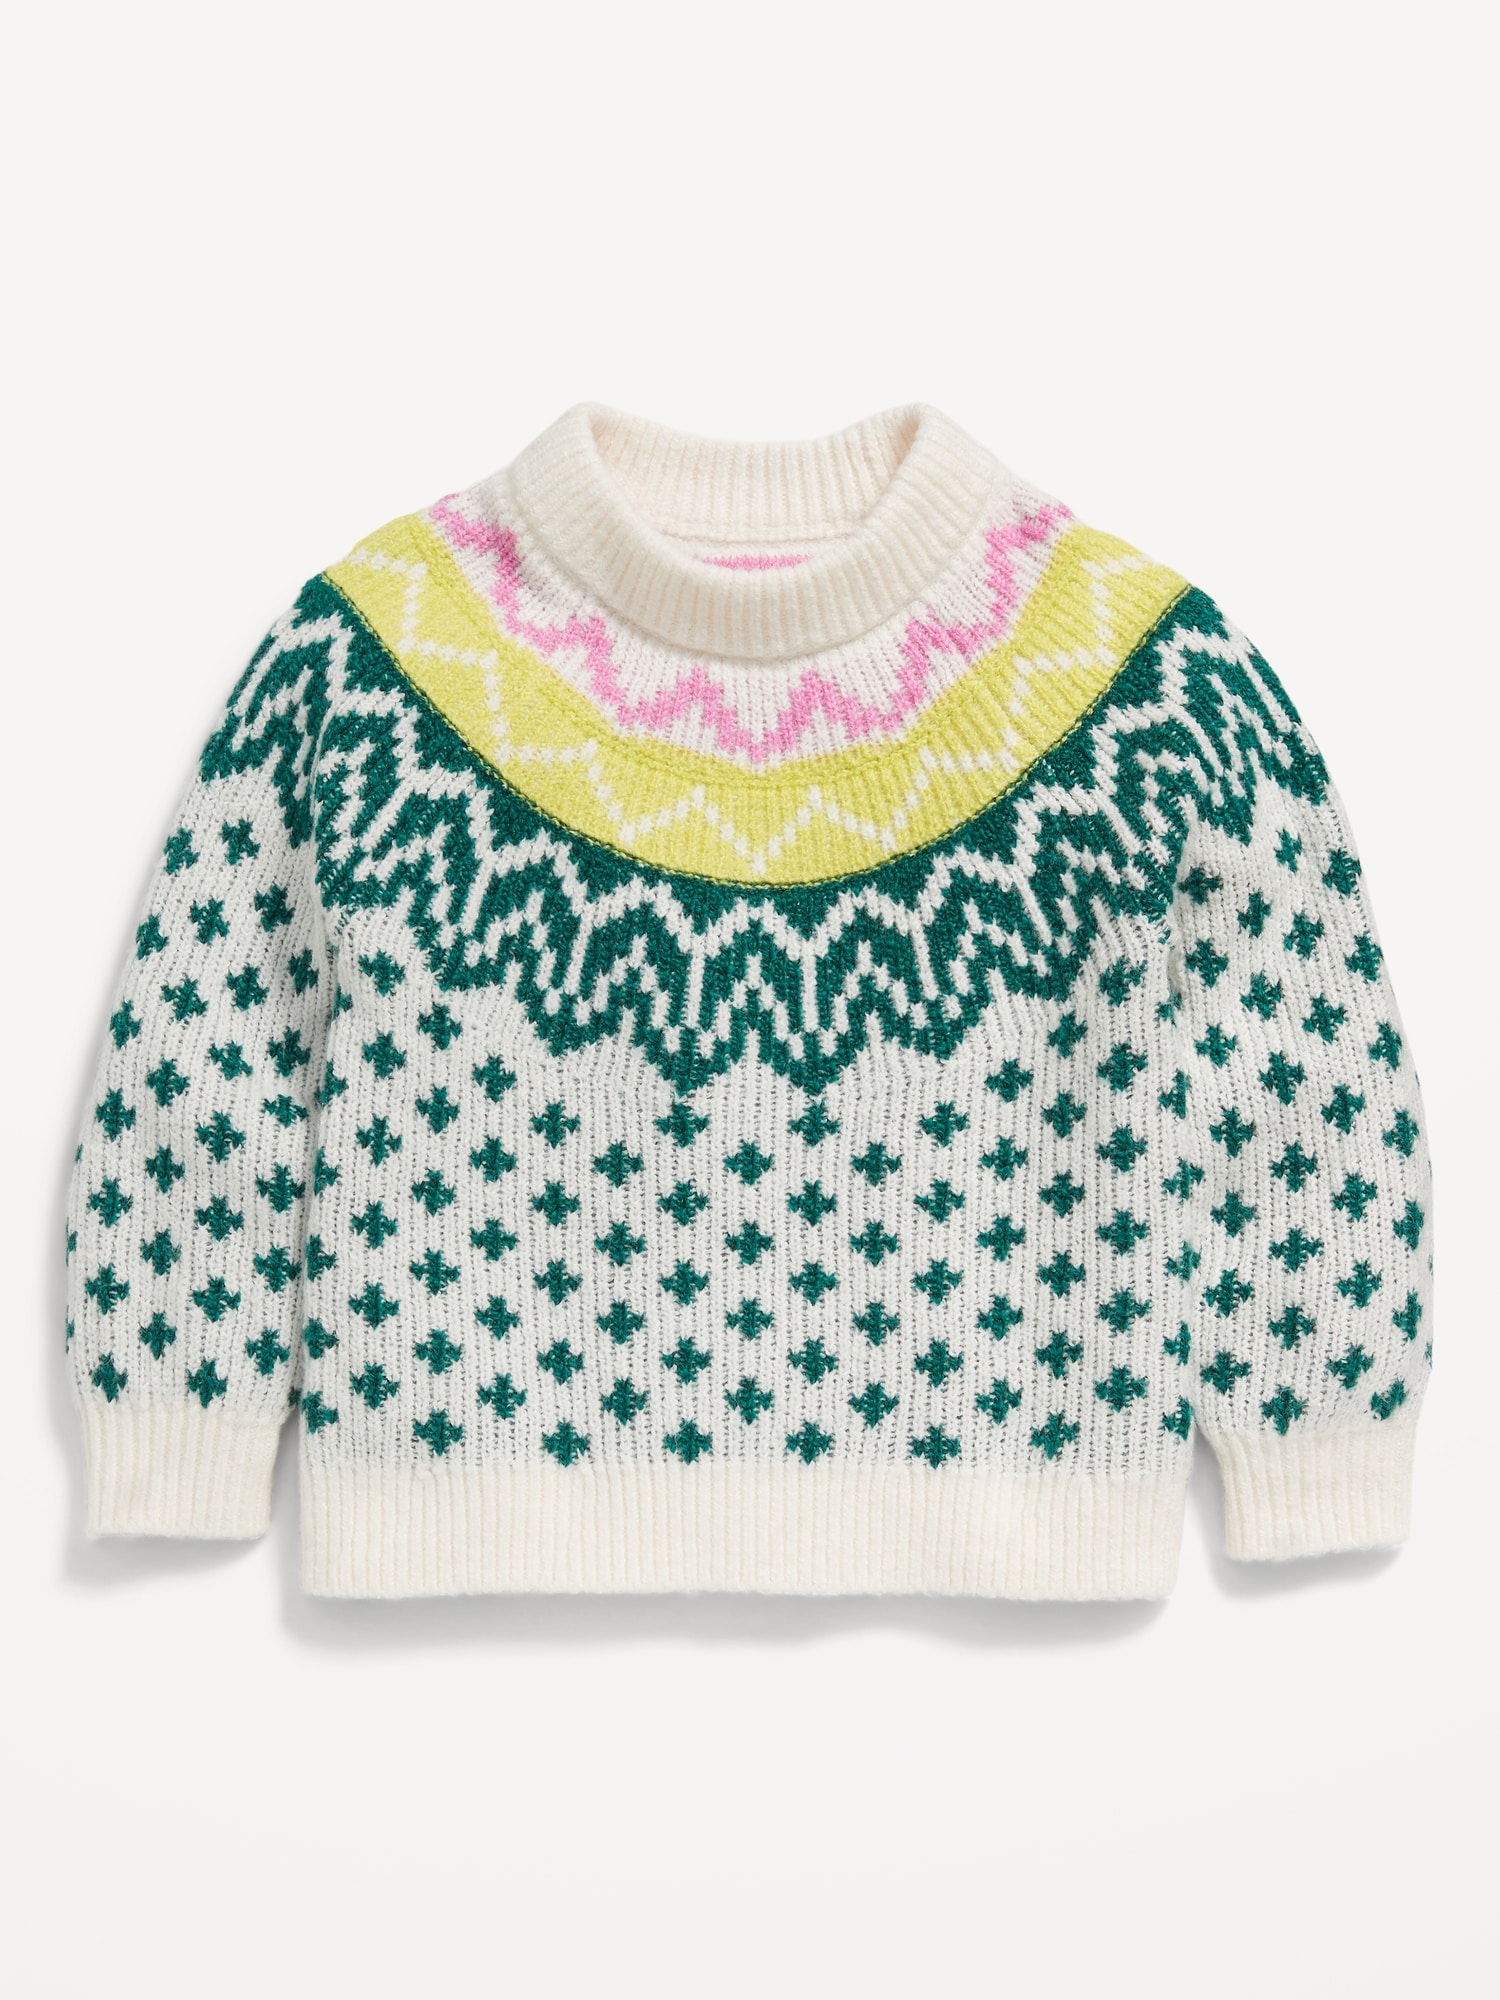 Cozy Fair Isle Pullover Sweater for Toddler Girls